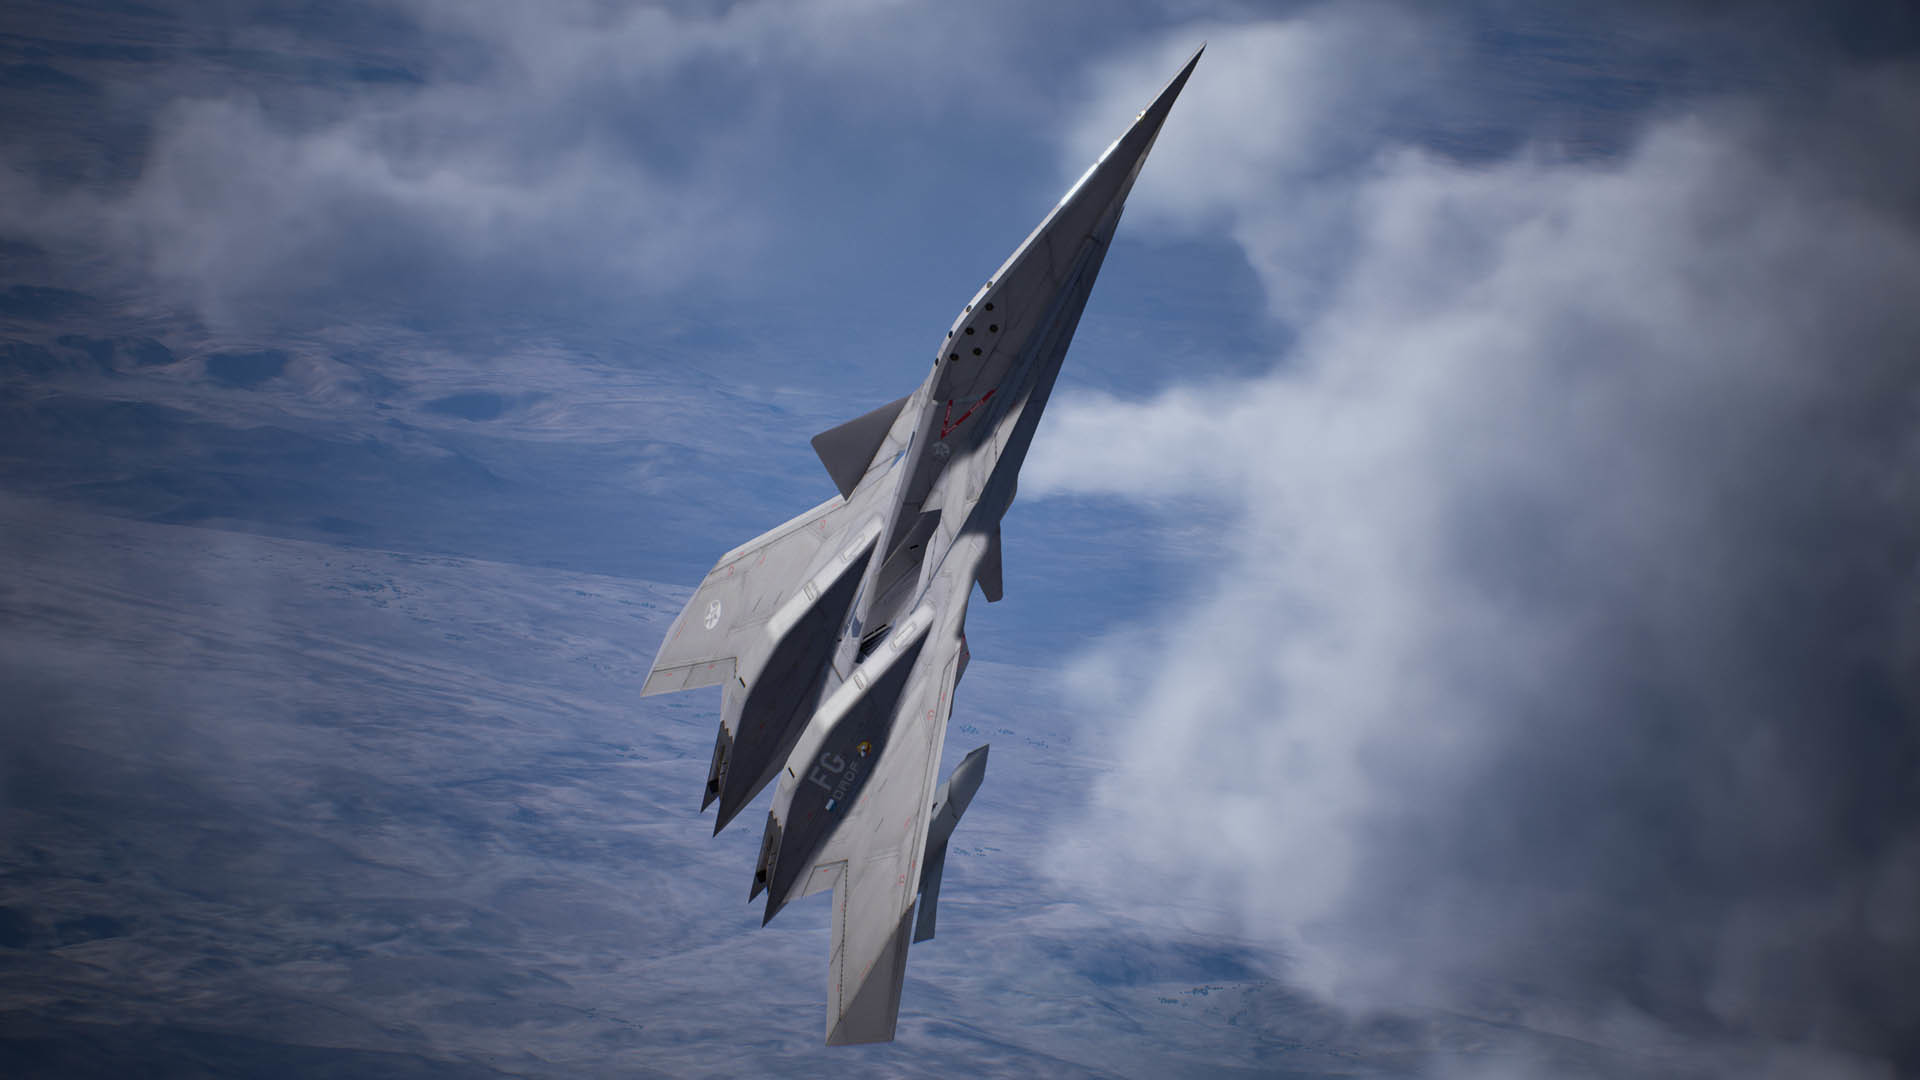 Ace Combat 7 Shows Off the Futuristic Aircraft Included in its Season Pass